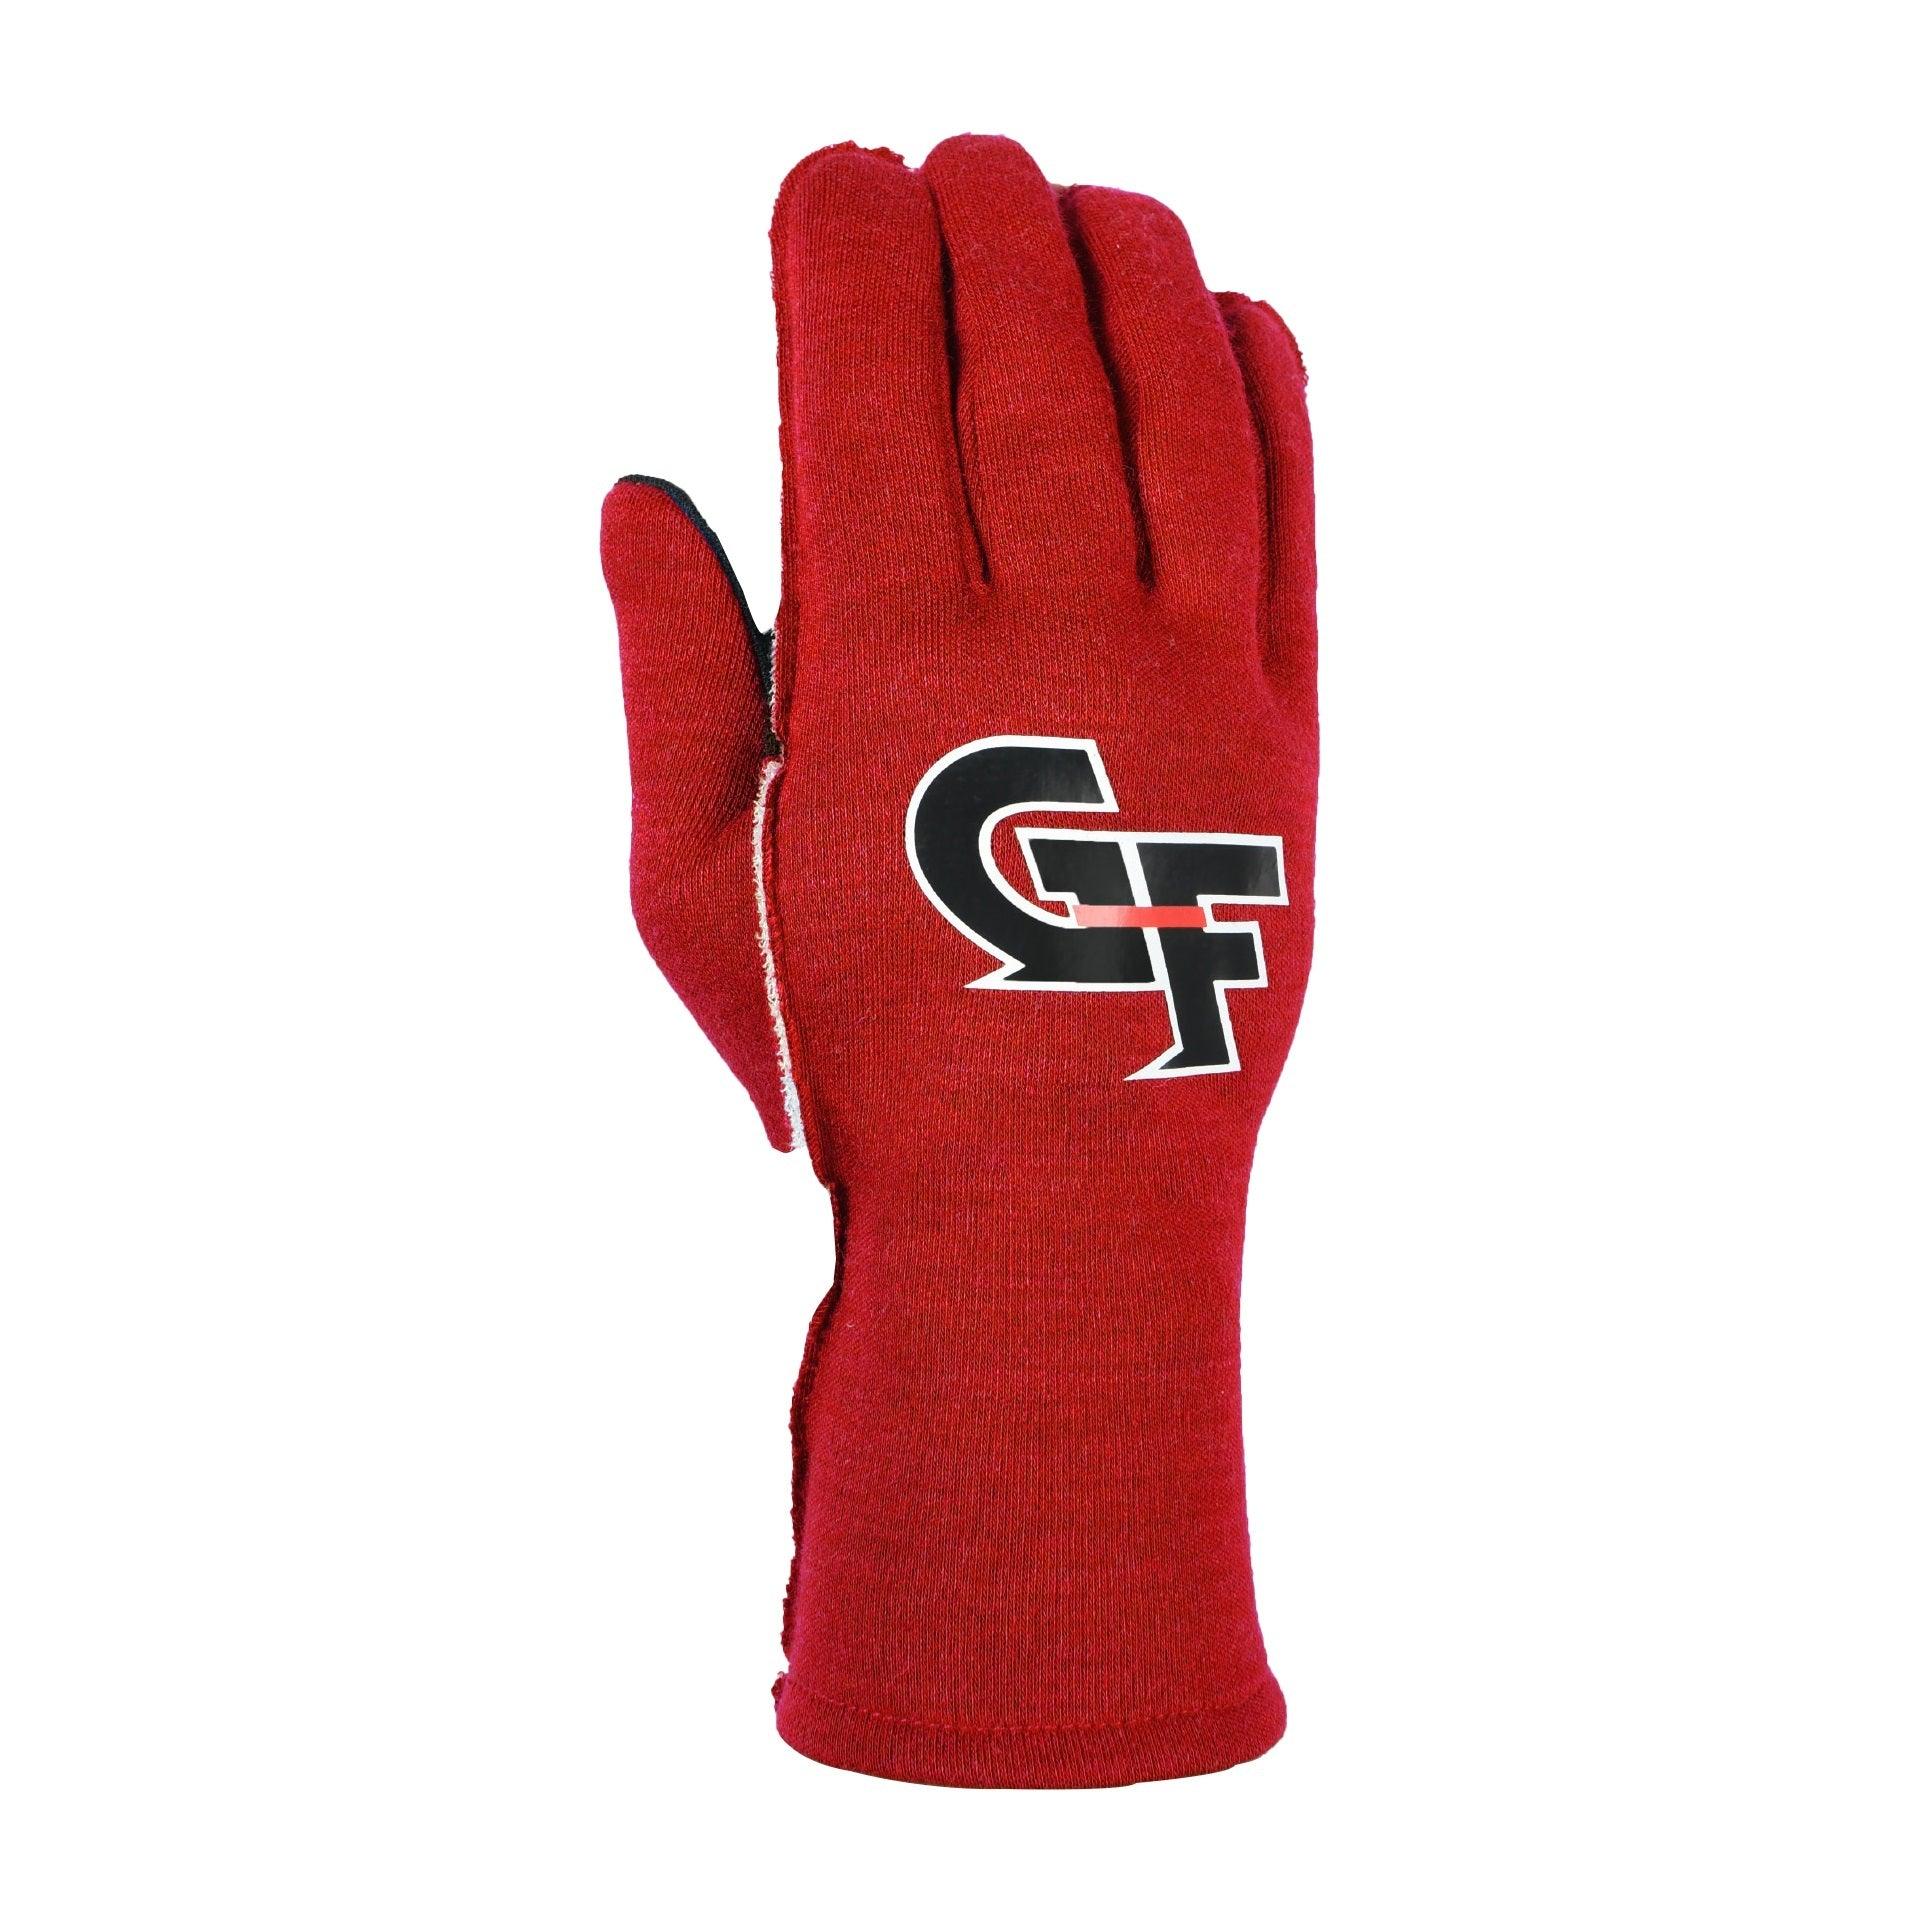 Gloves G-Limit X-Small Red - Burlile Performance Products